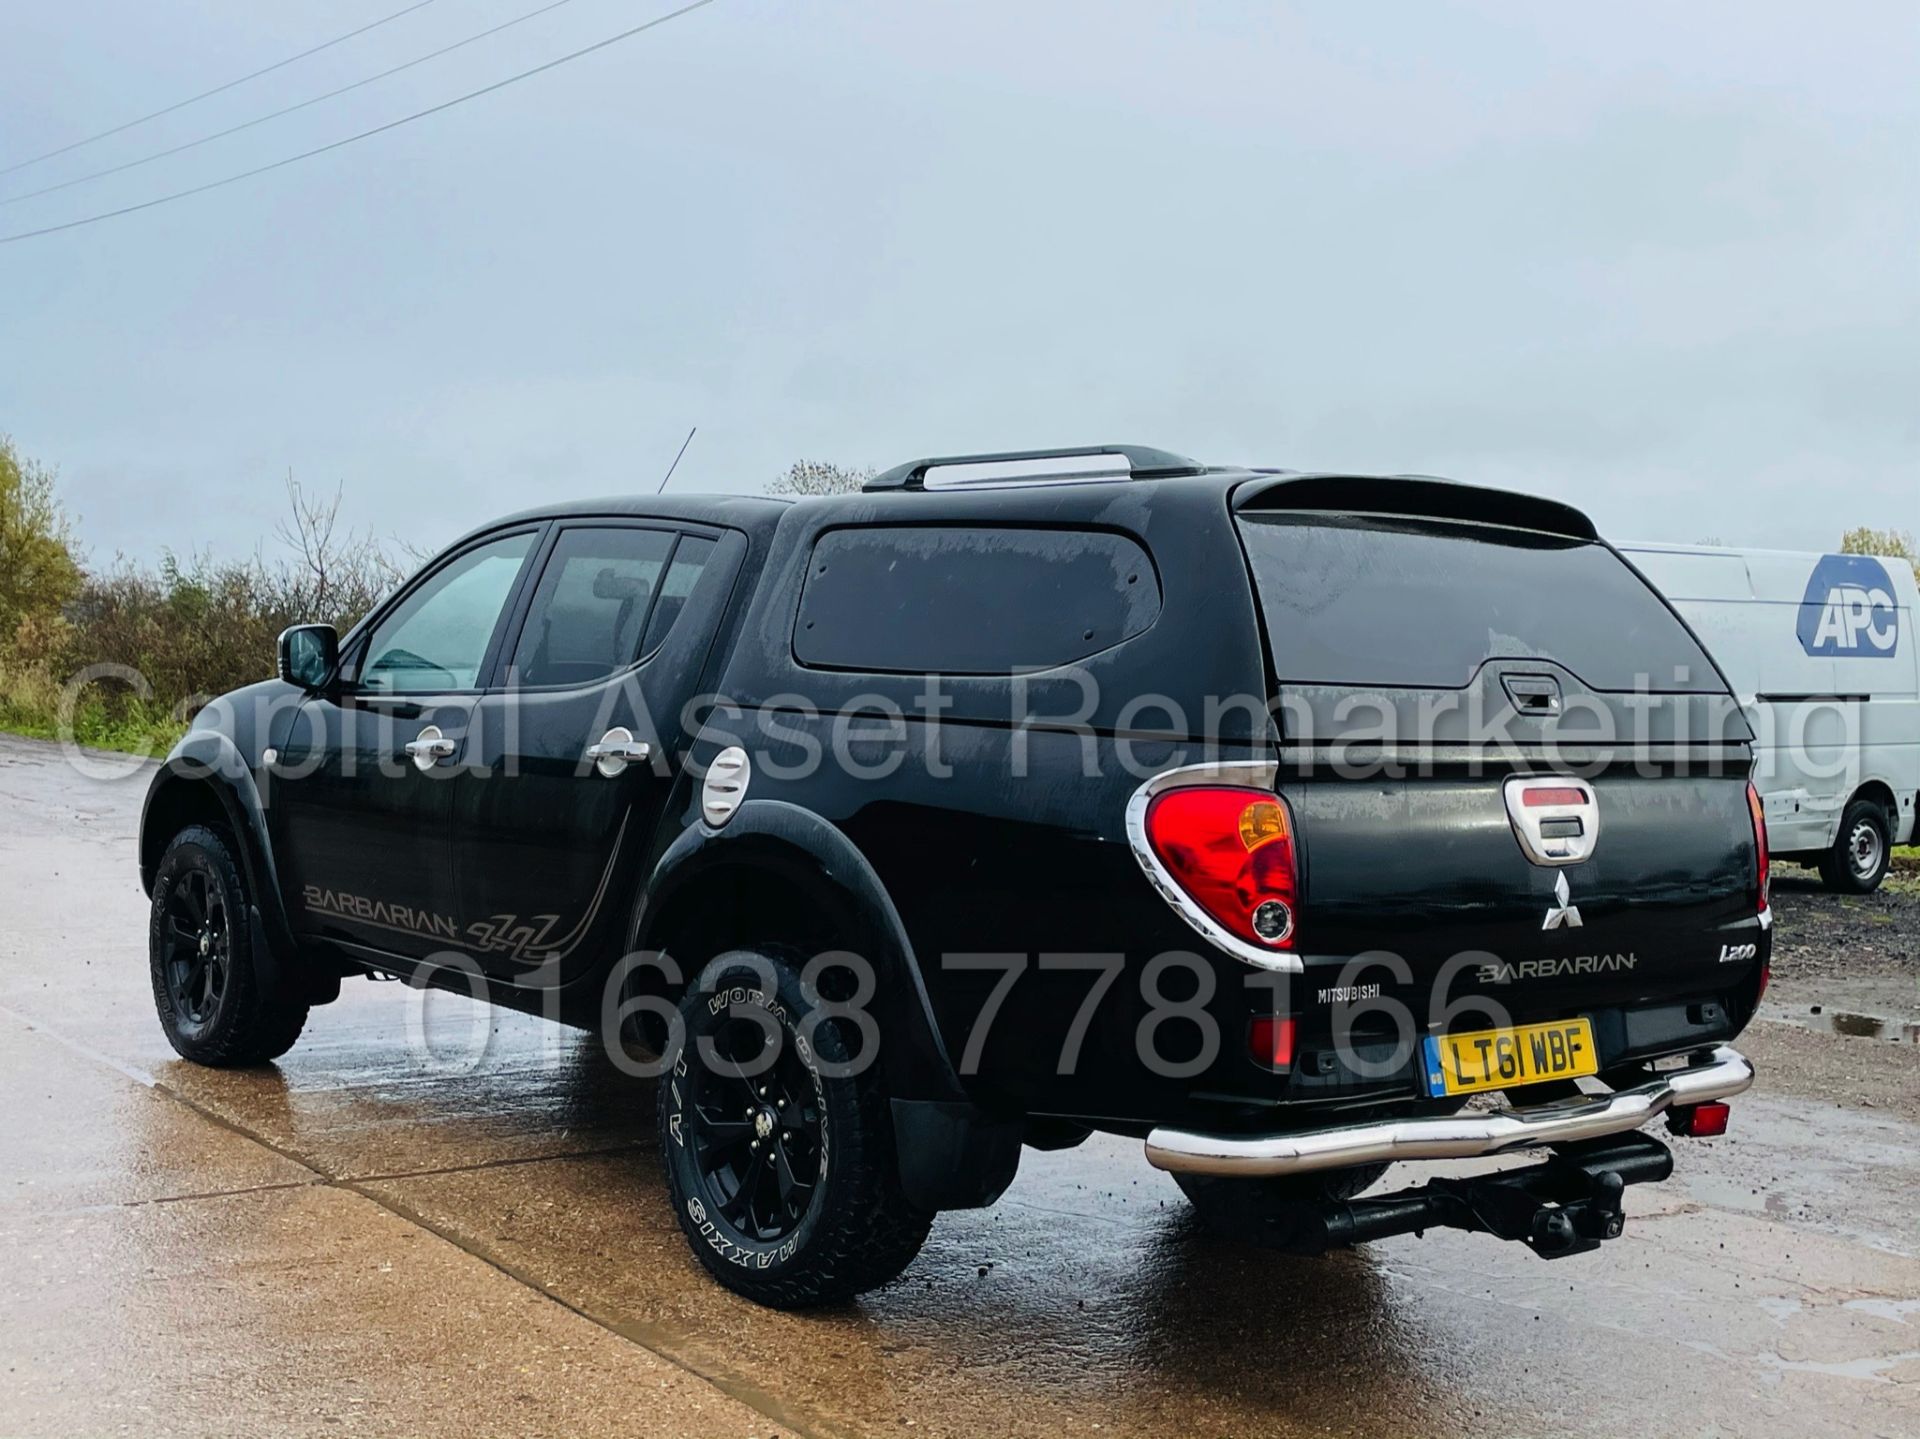 (On Sale) MITSUBISHI L200 *BARBARIAN EDITION* DOUBLE CAB PICK-UP (61 REG) 'AUTO - LEATHER - SAT NAV' - Image 10 of 42